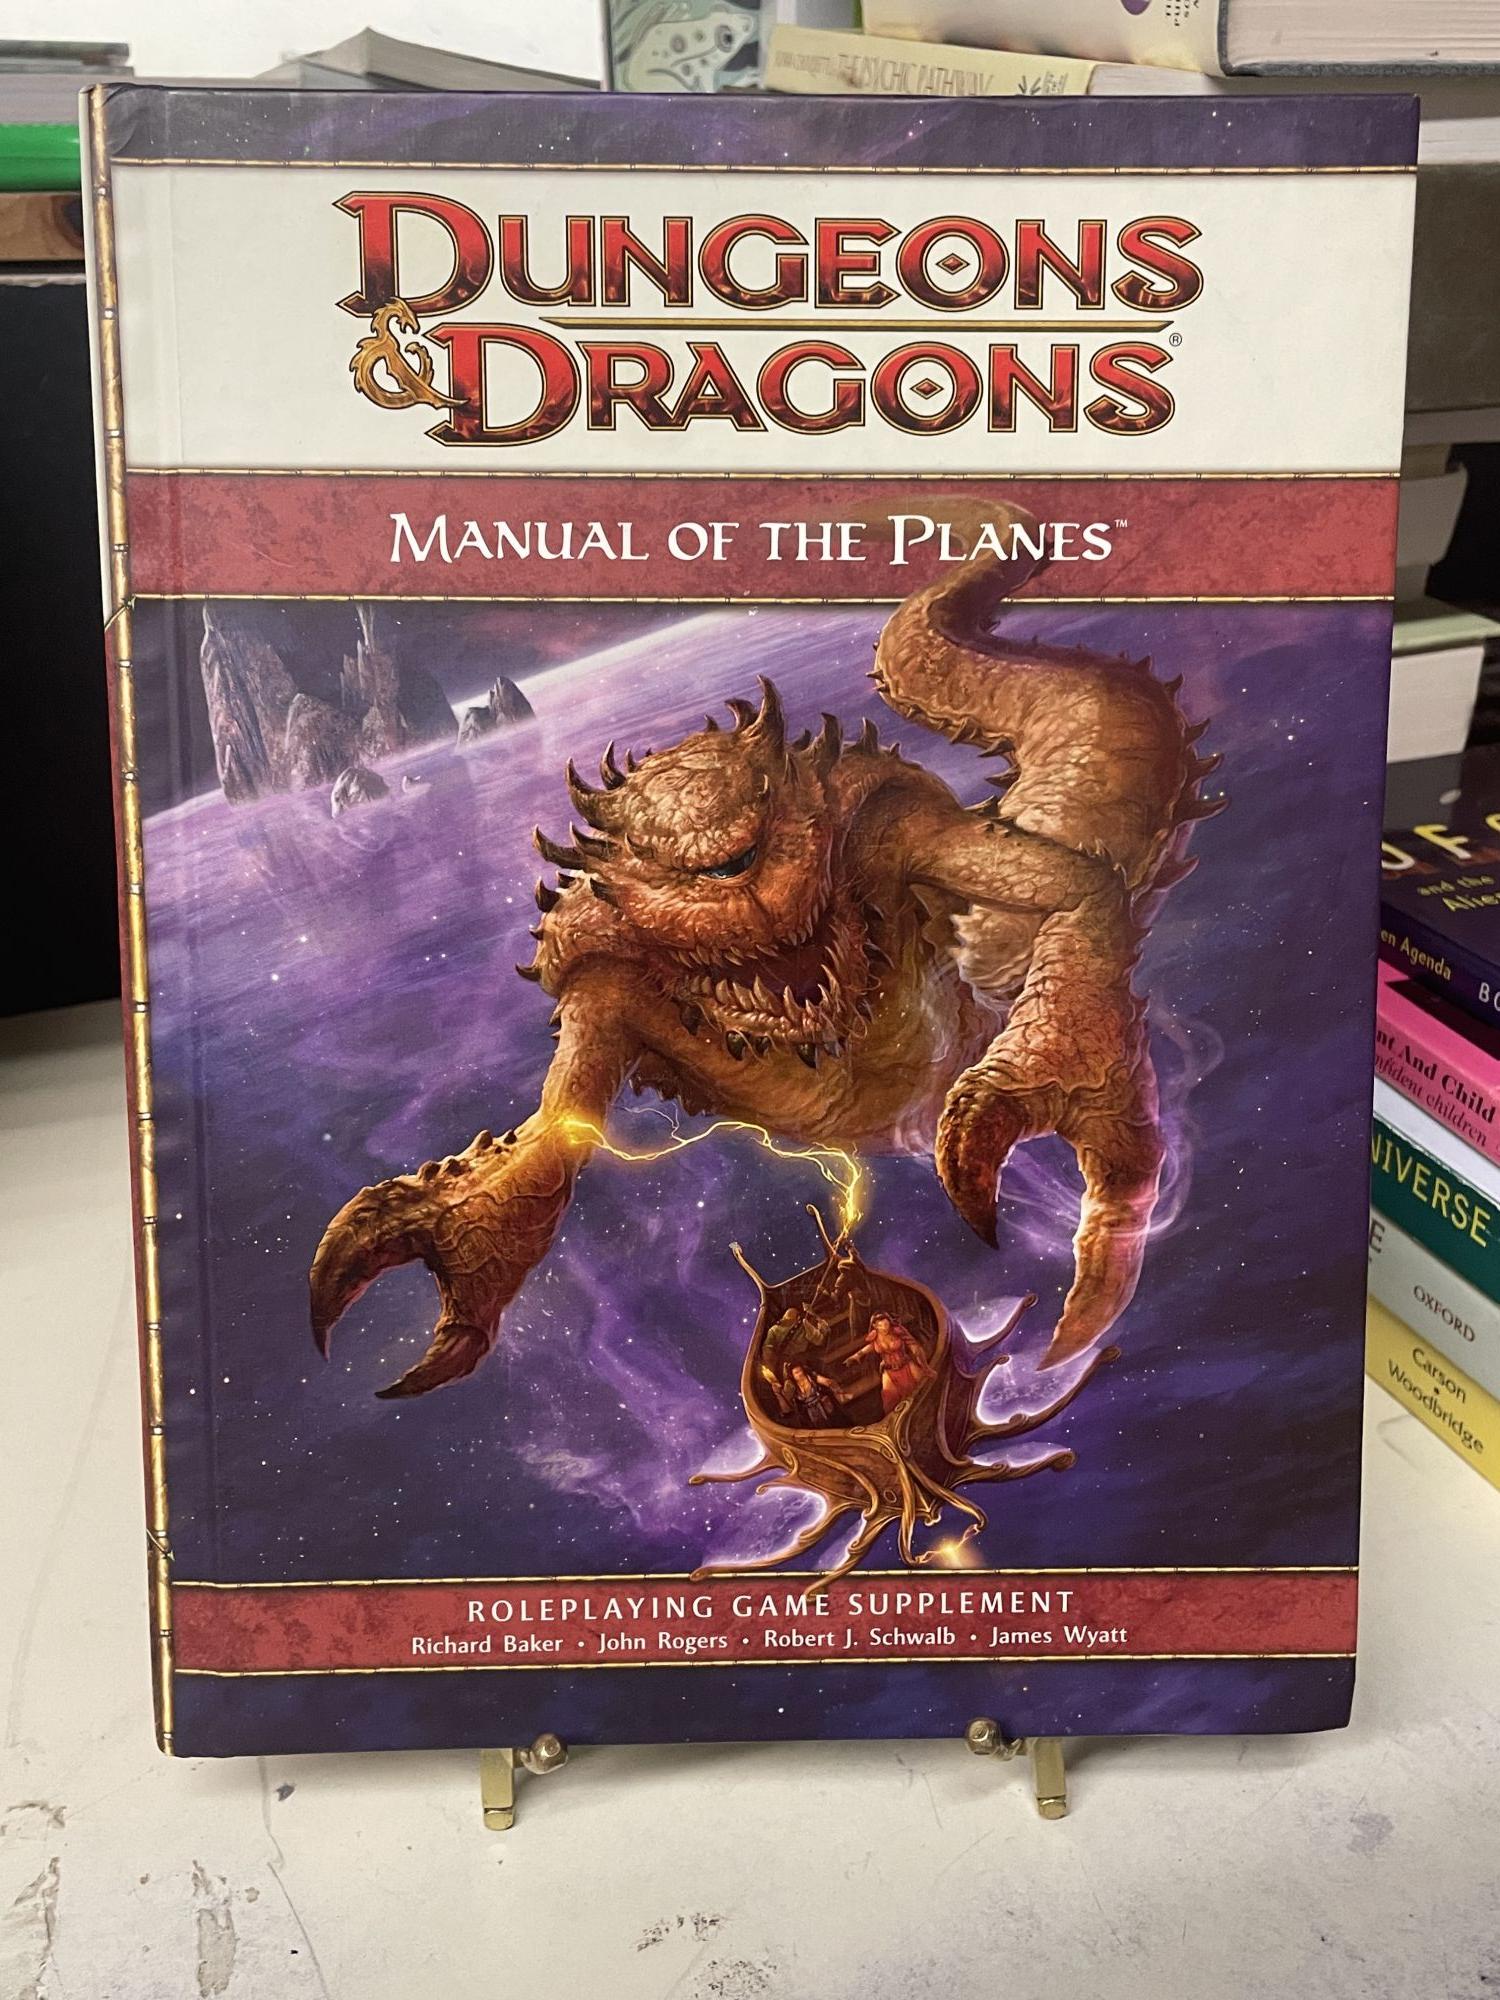 Dungeon & Dragons: Manual of the Planes, Roleplaying Game Supplement - Baker, Richard